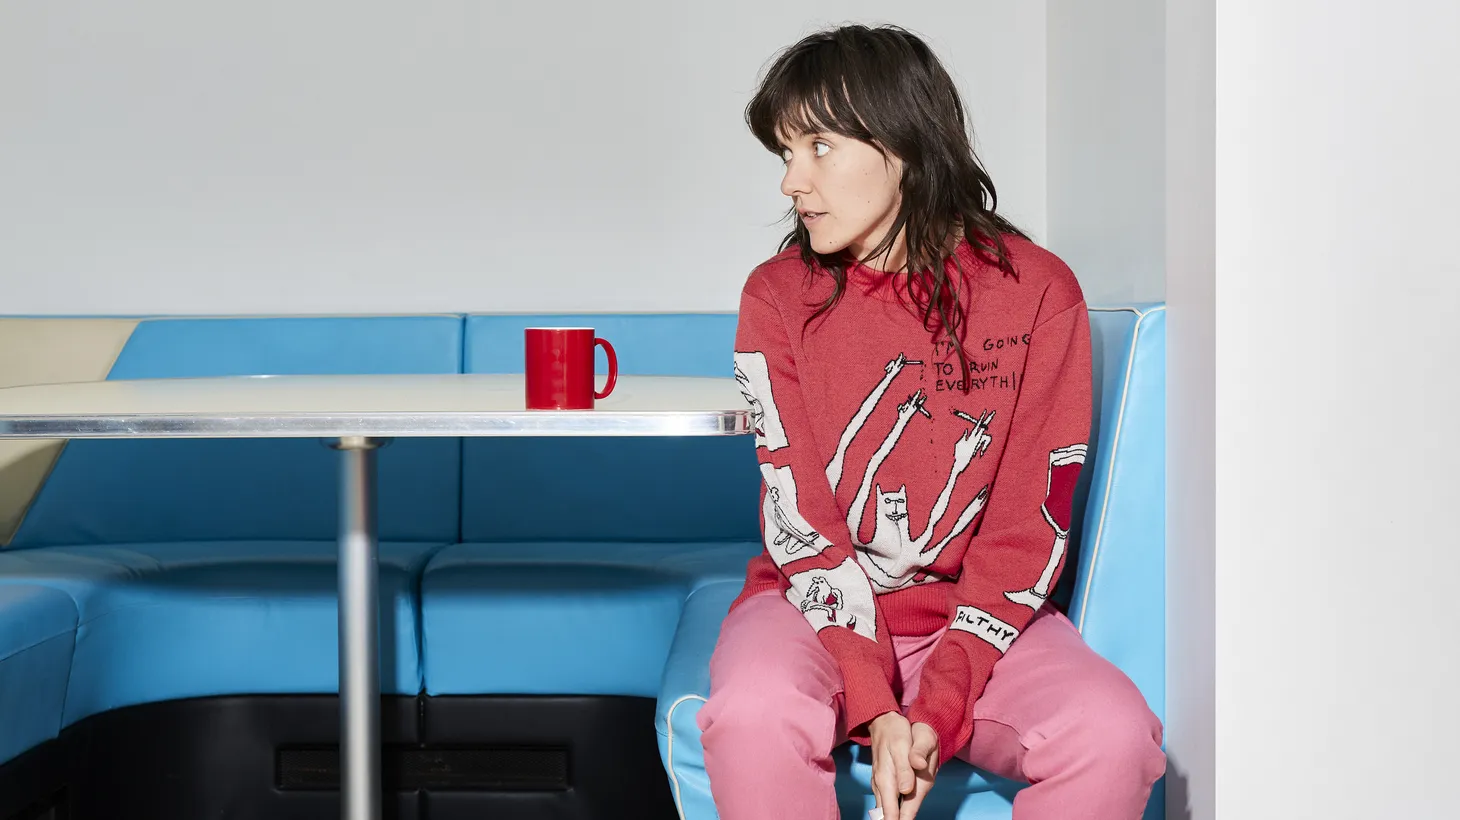 “A lot of the film is hard for me to watch actually, because I can hear how sad I sound. But it’s also nice to reflect on those moments,” Courtney Barnett says about her new film “Anonymous Club.”